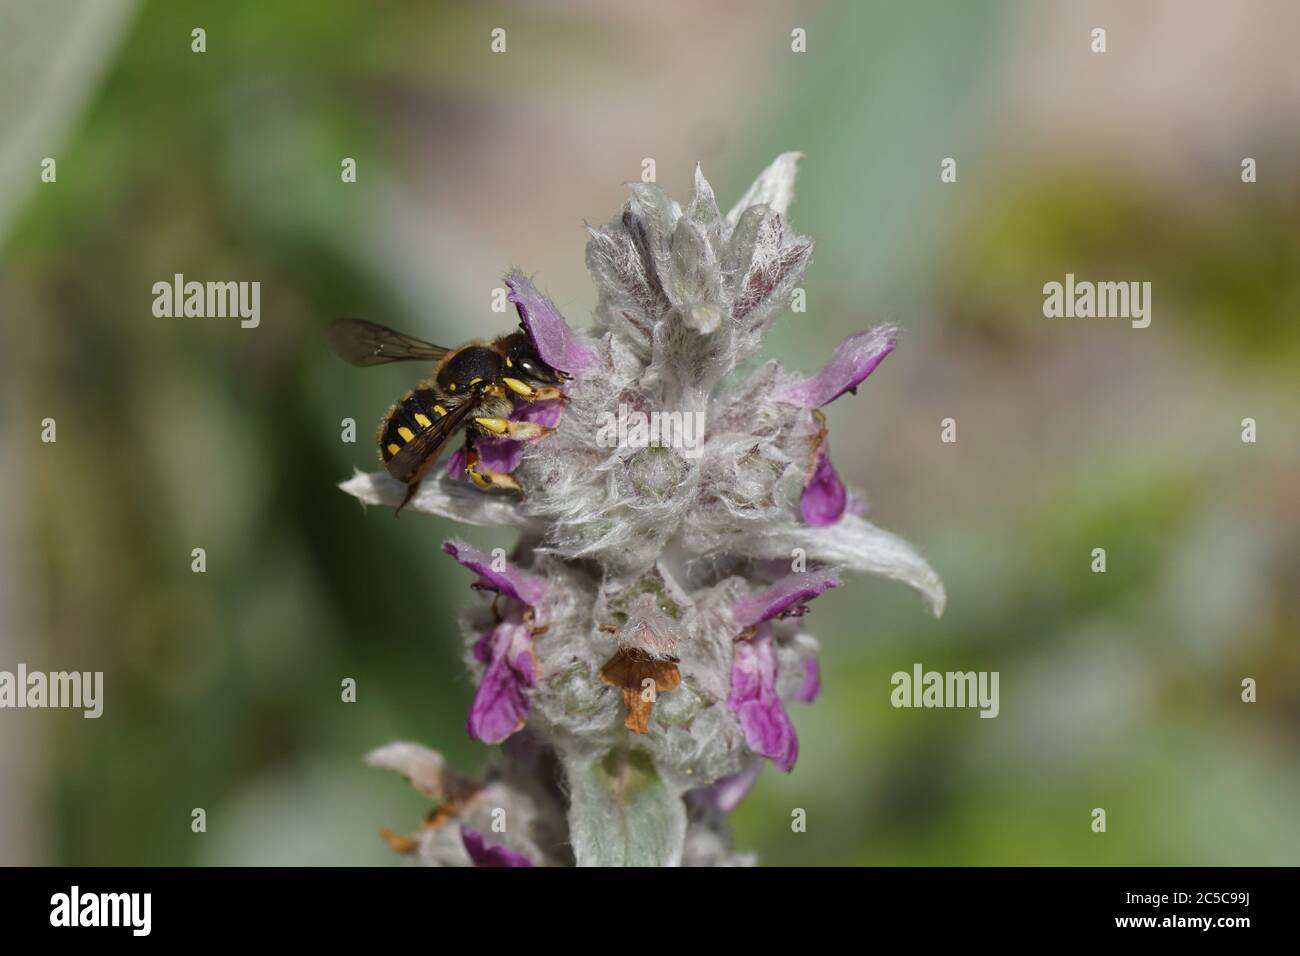 European wool carder bee (Anthidium manicatum) family Megachilidae, the leaf-cutter bees or mason bees on flowers of lamb's-ear or woolly hedgenettle Stock Photo